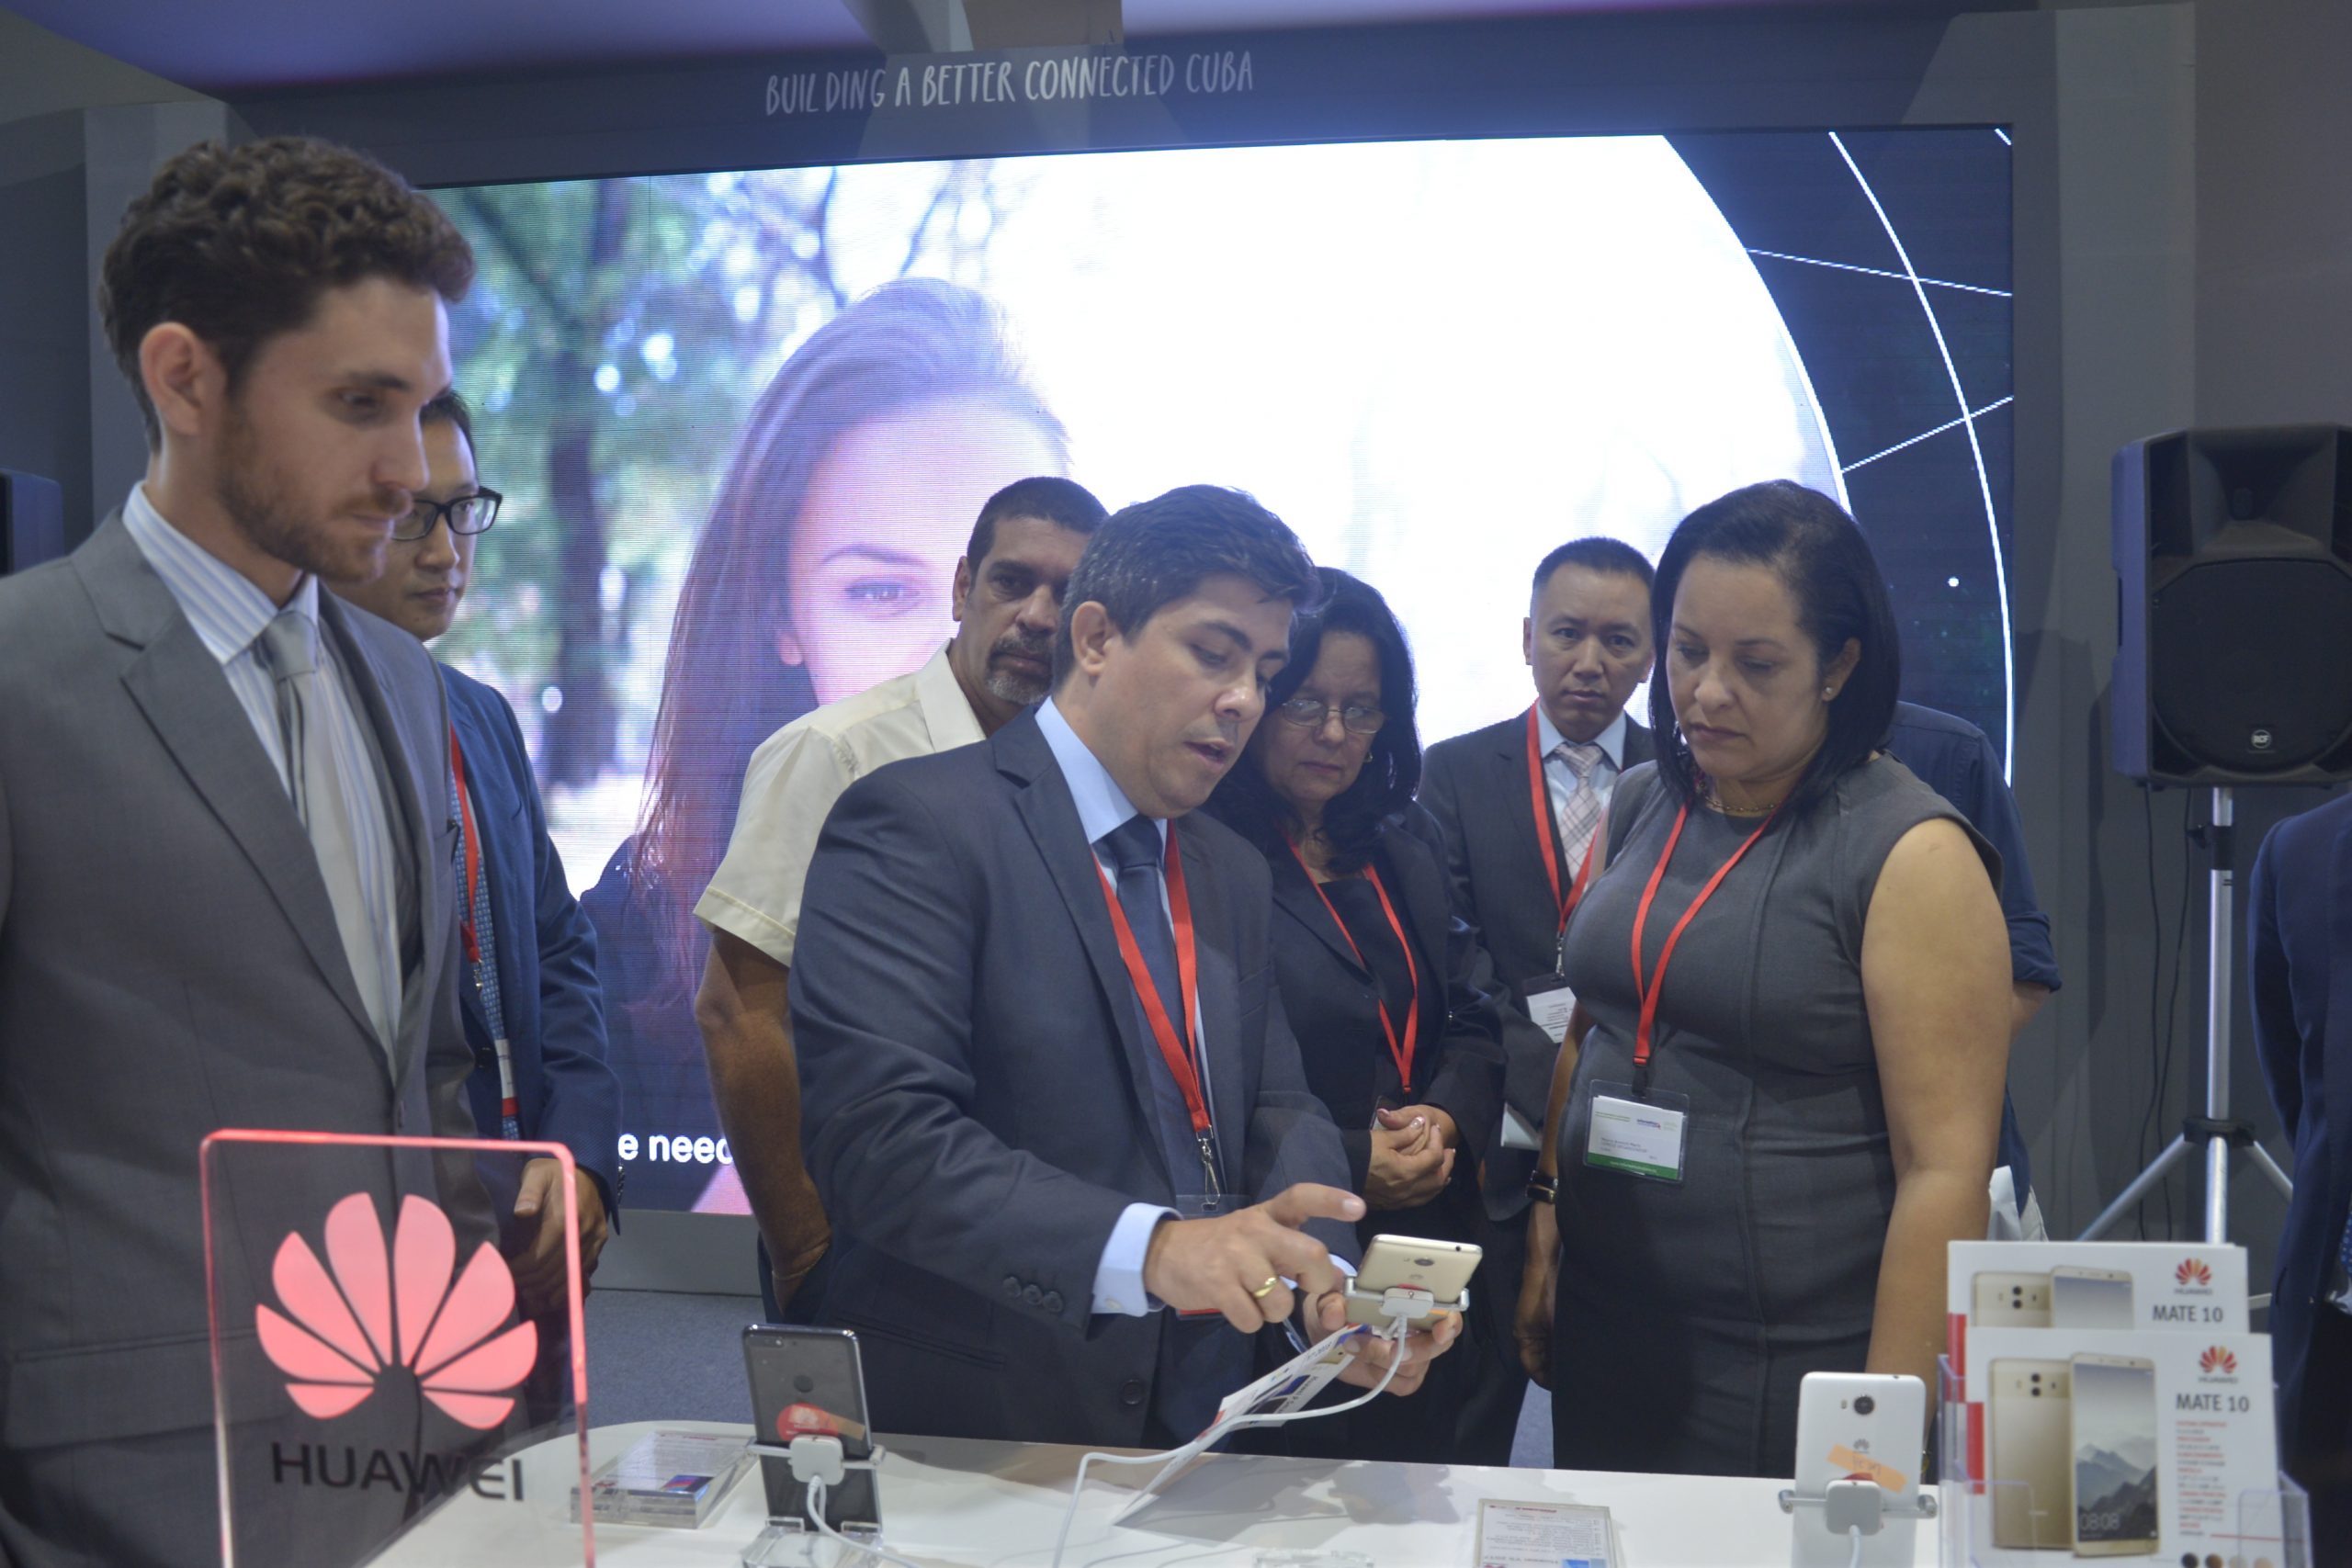 Current Minister of Communications, then President of Etecsa visits the stand from Huawei